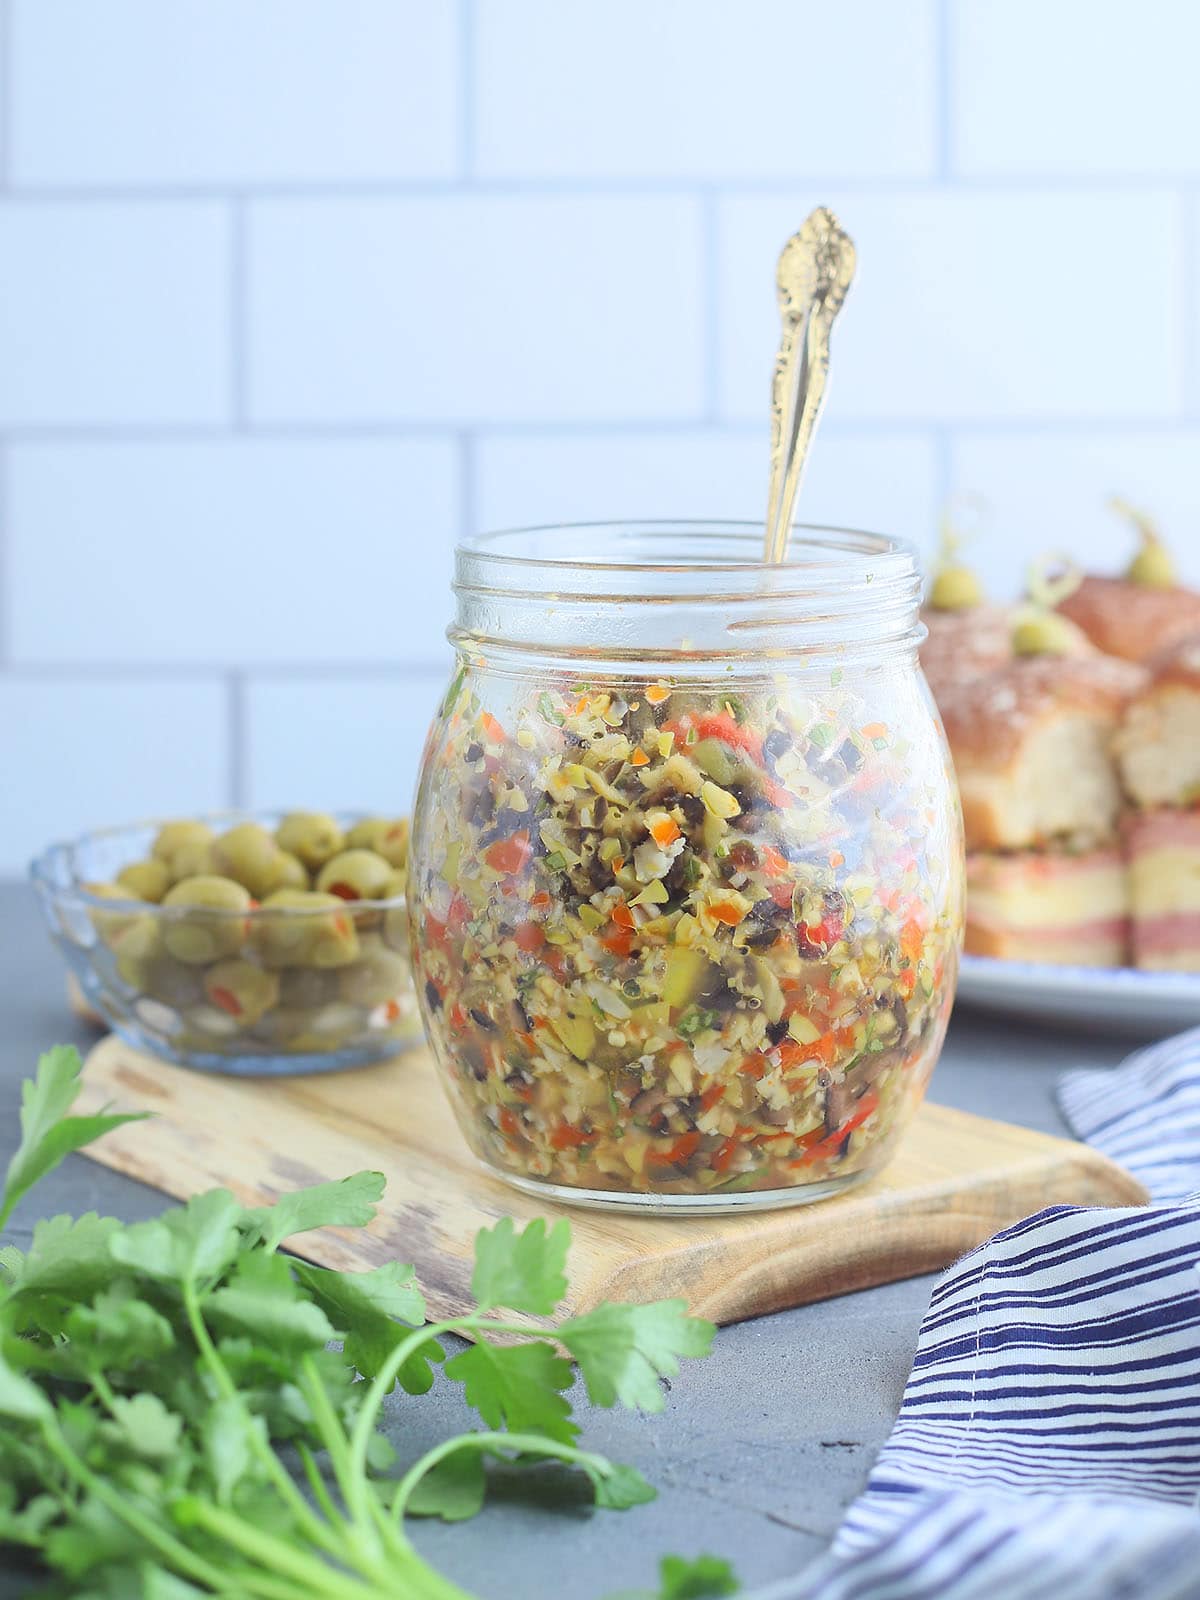 Glass jar of muffuletta olive salad with a serving spoon on a cutting board.